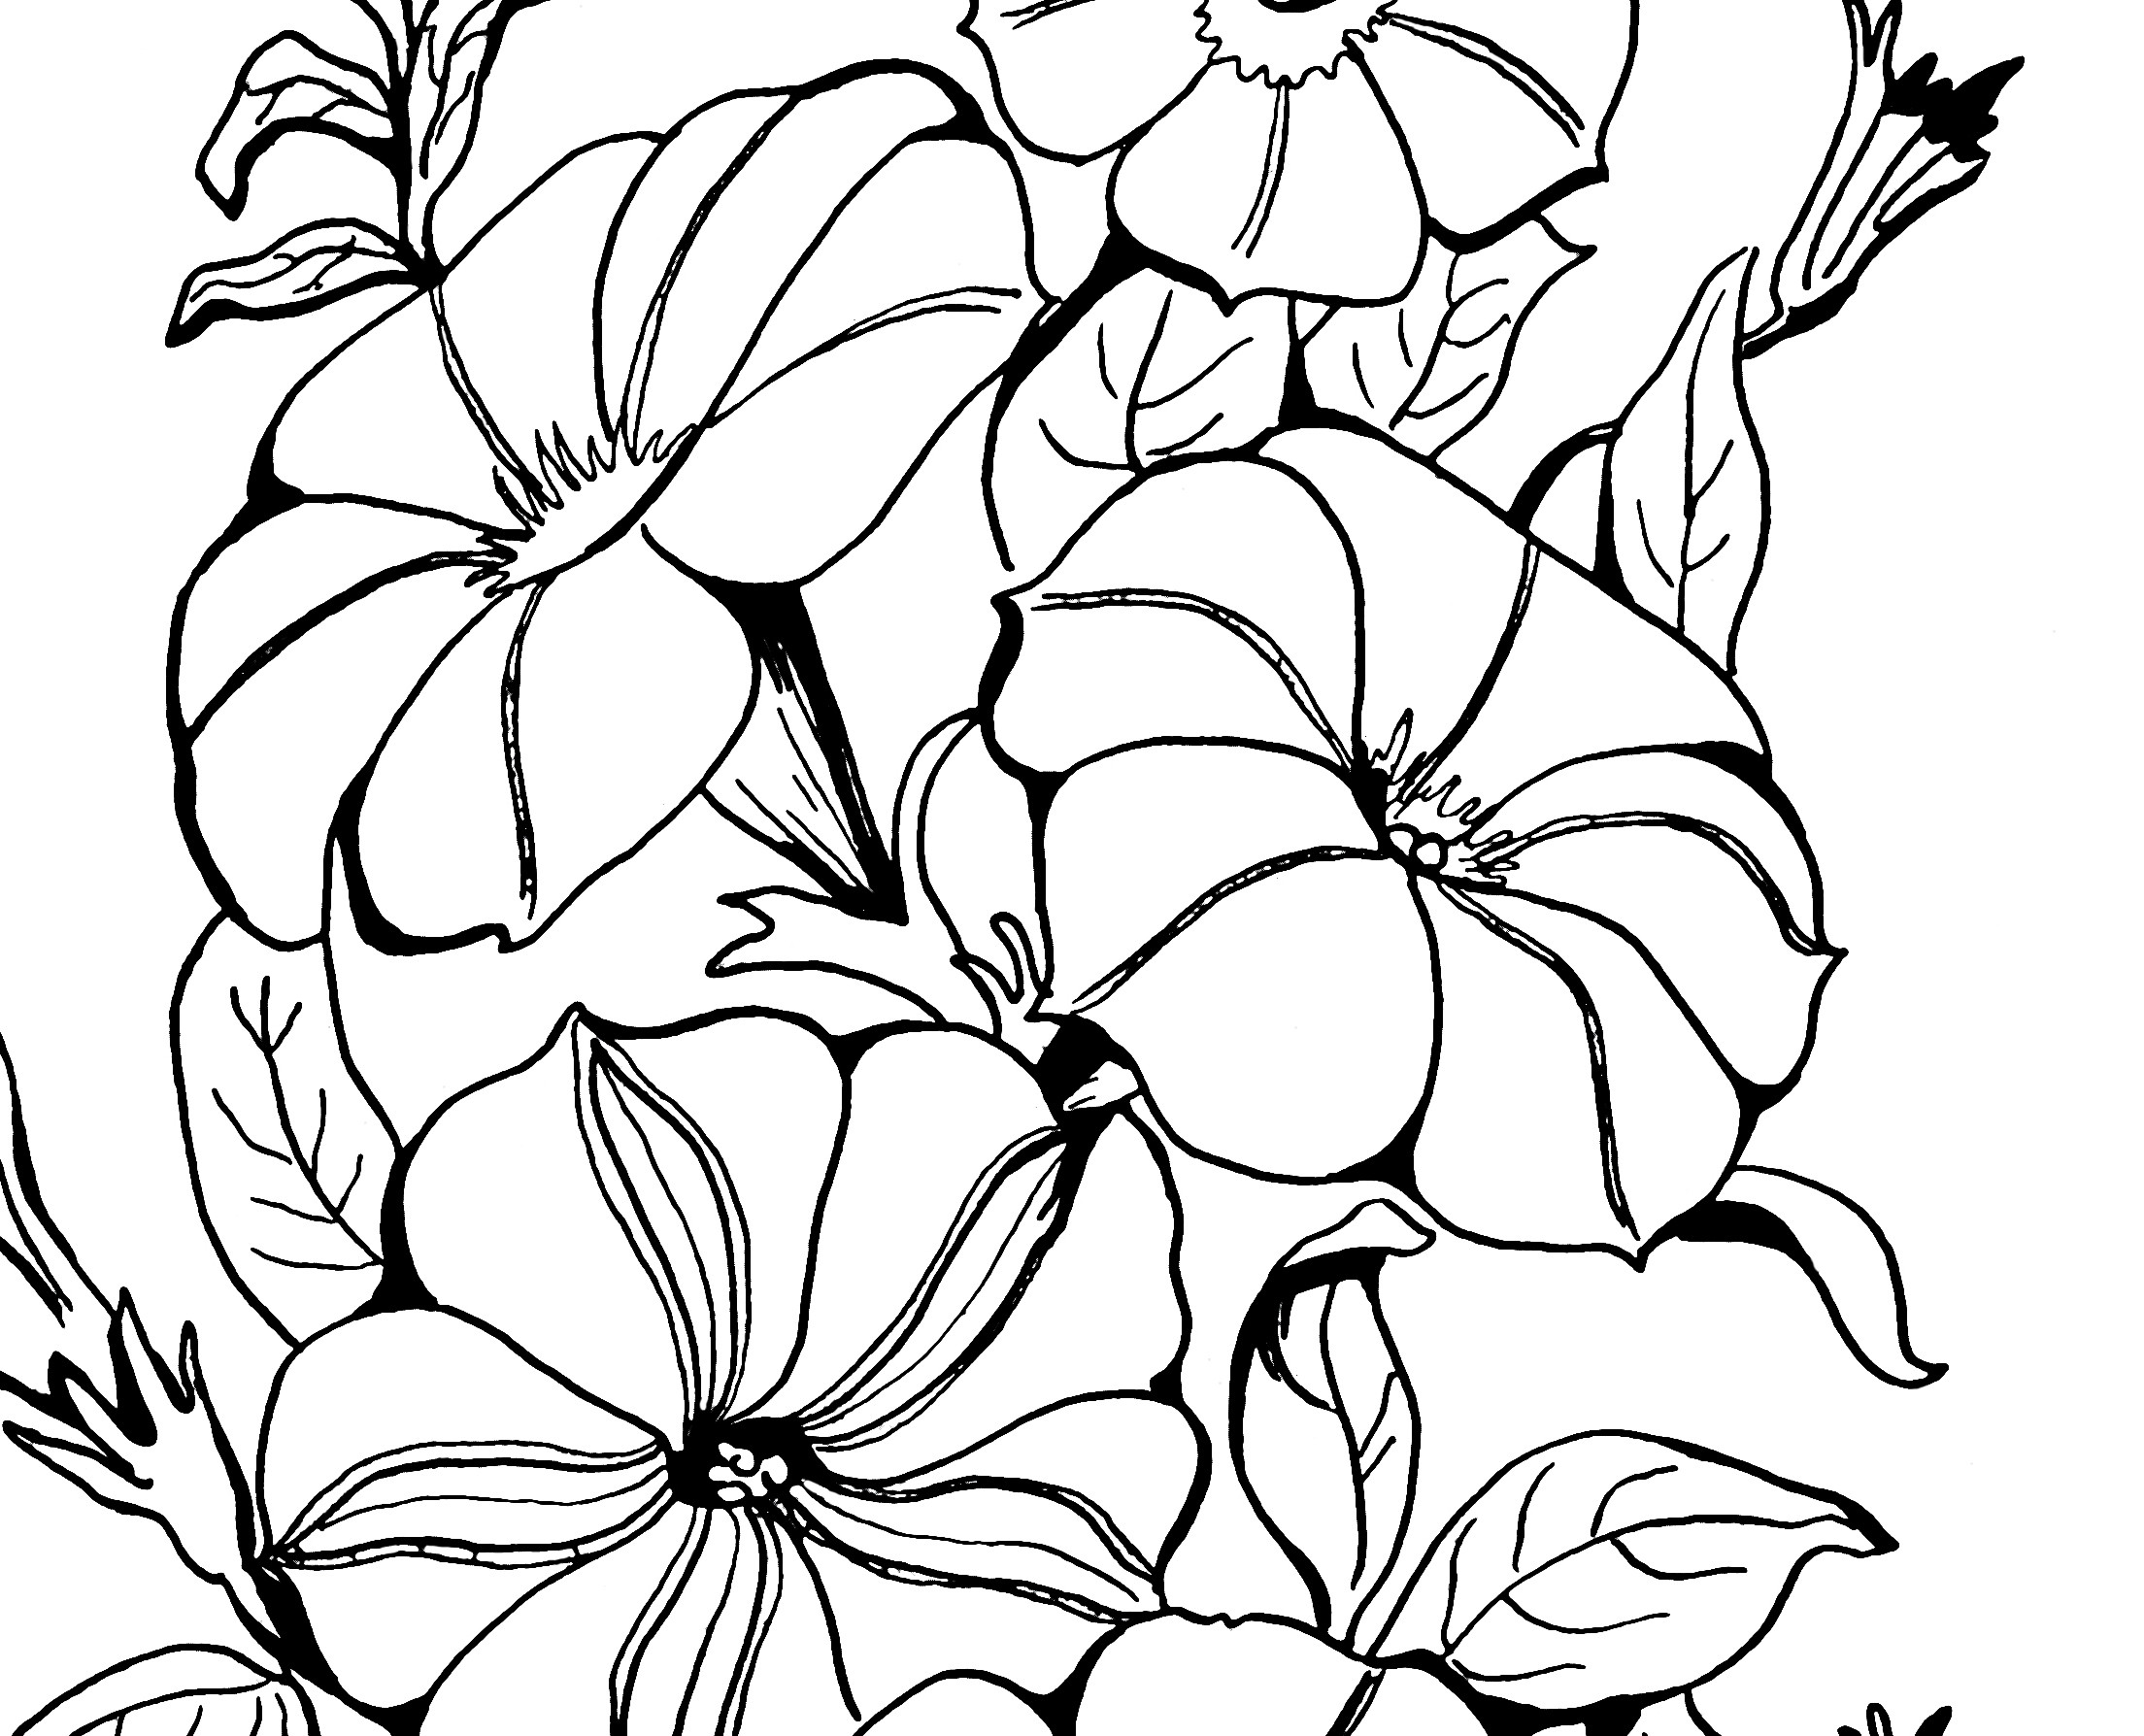 Adult Coloring Book Images
 Adult Coloring Page Petunias The Graphics Fairy